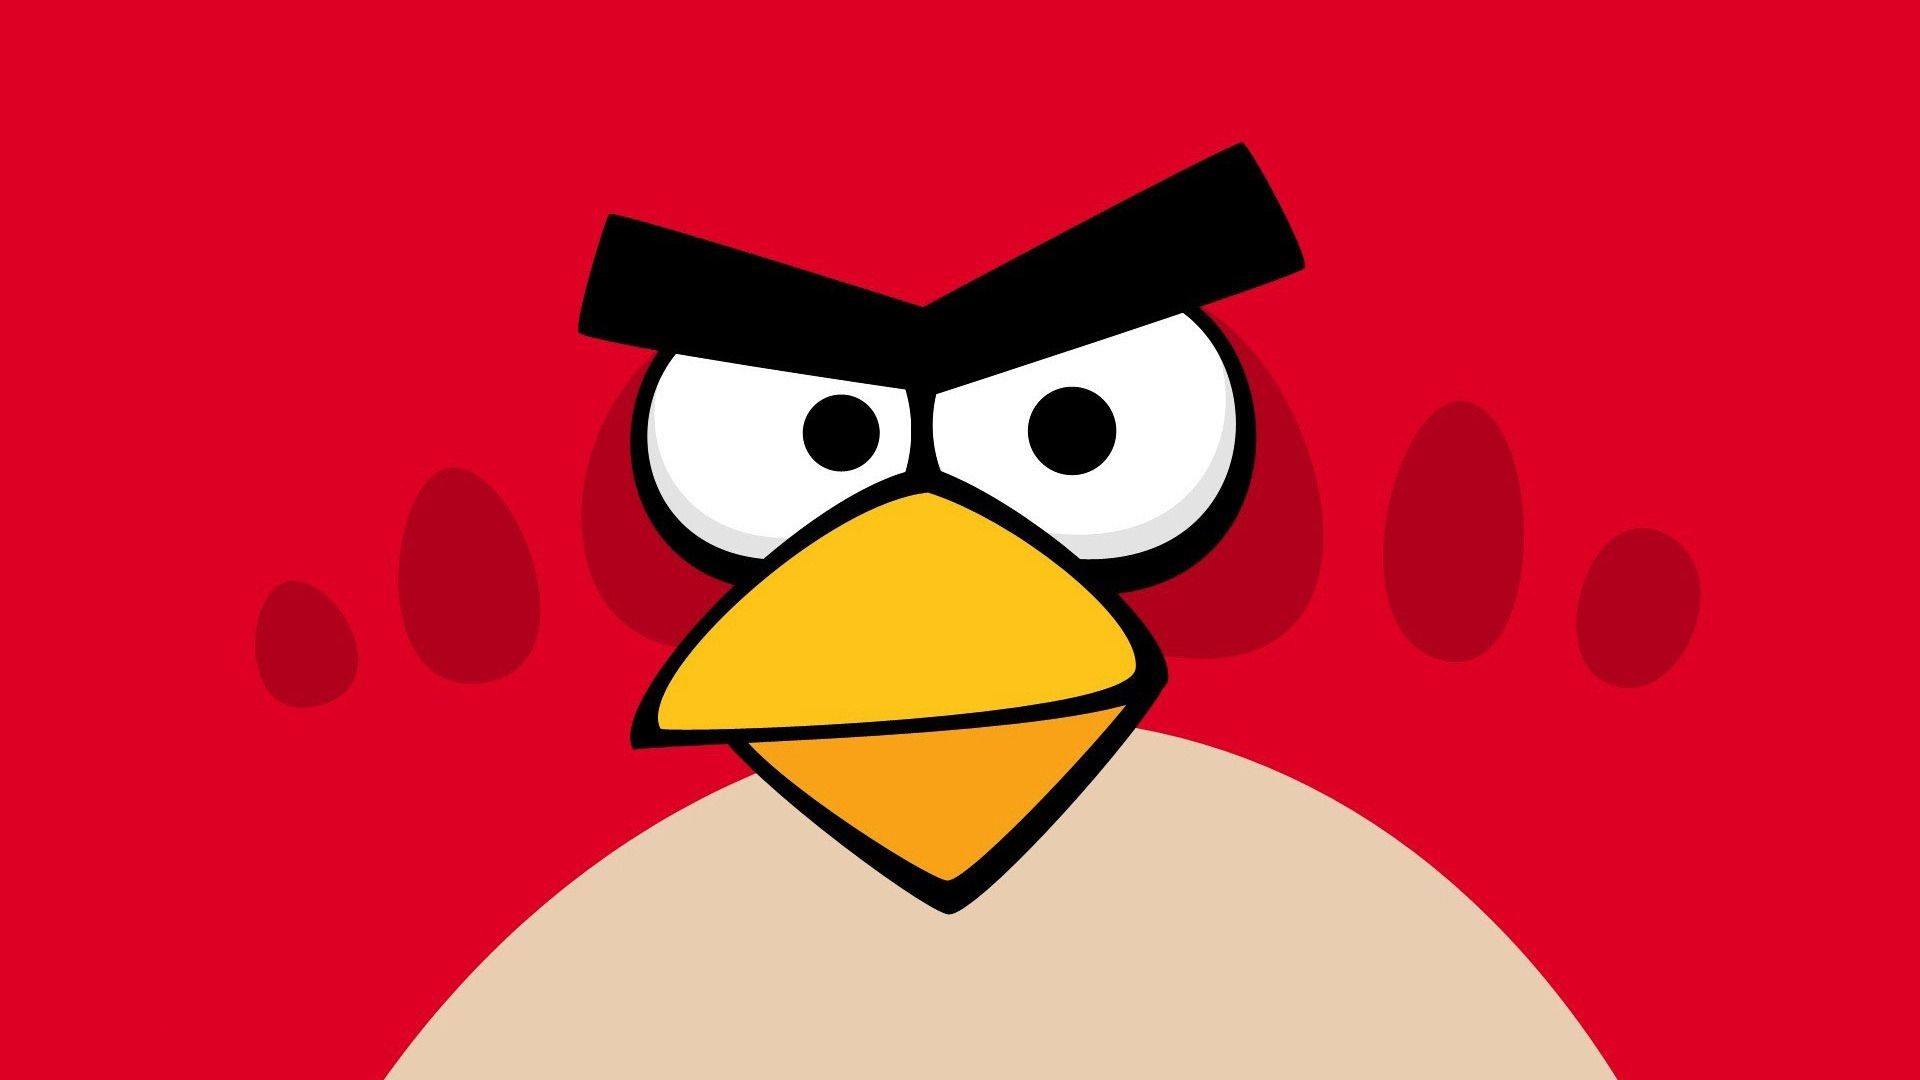 Angry Birds Pictures